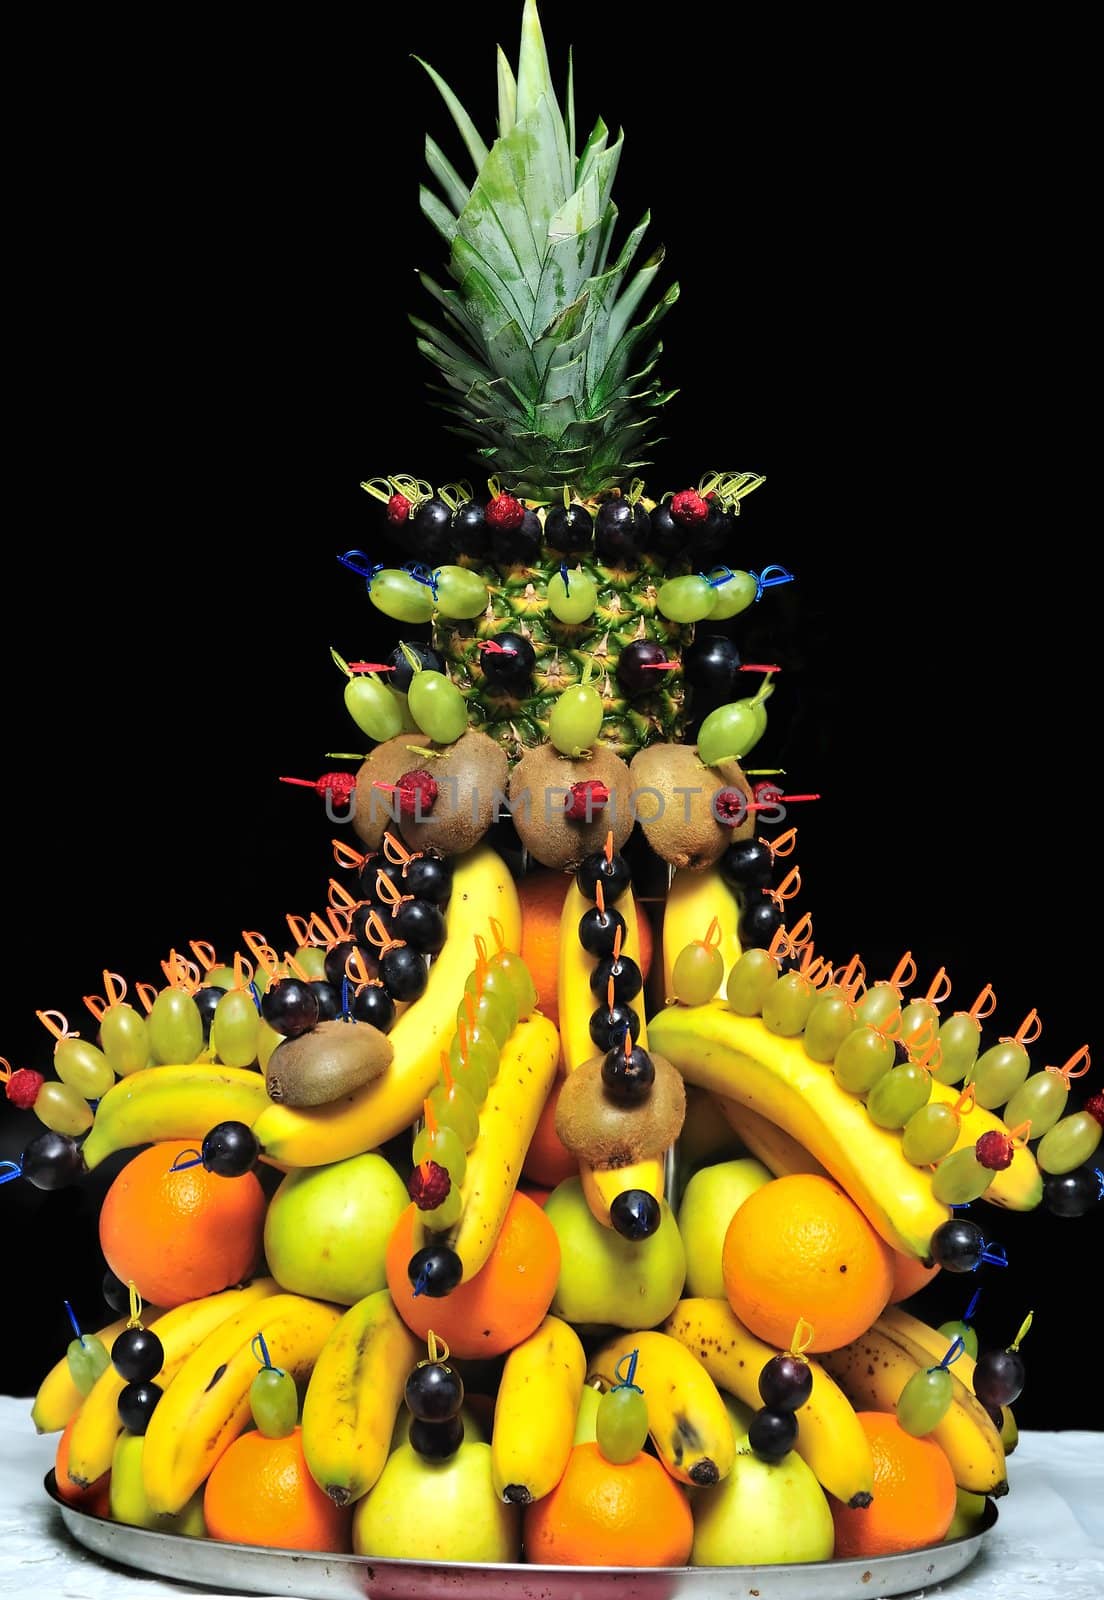 decoration is made from different kinds of fruit